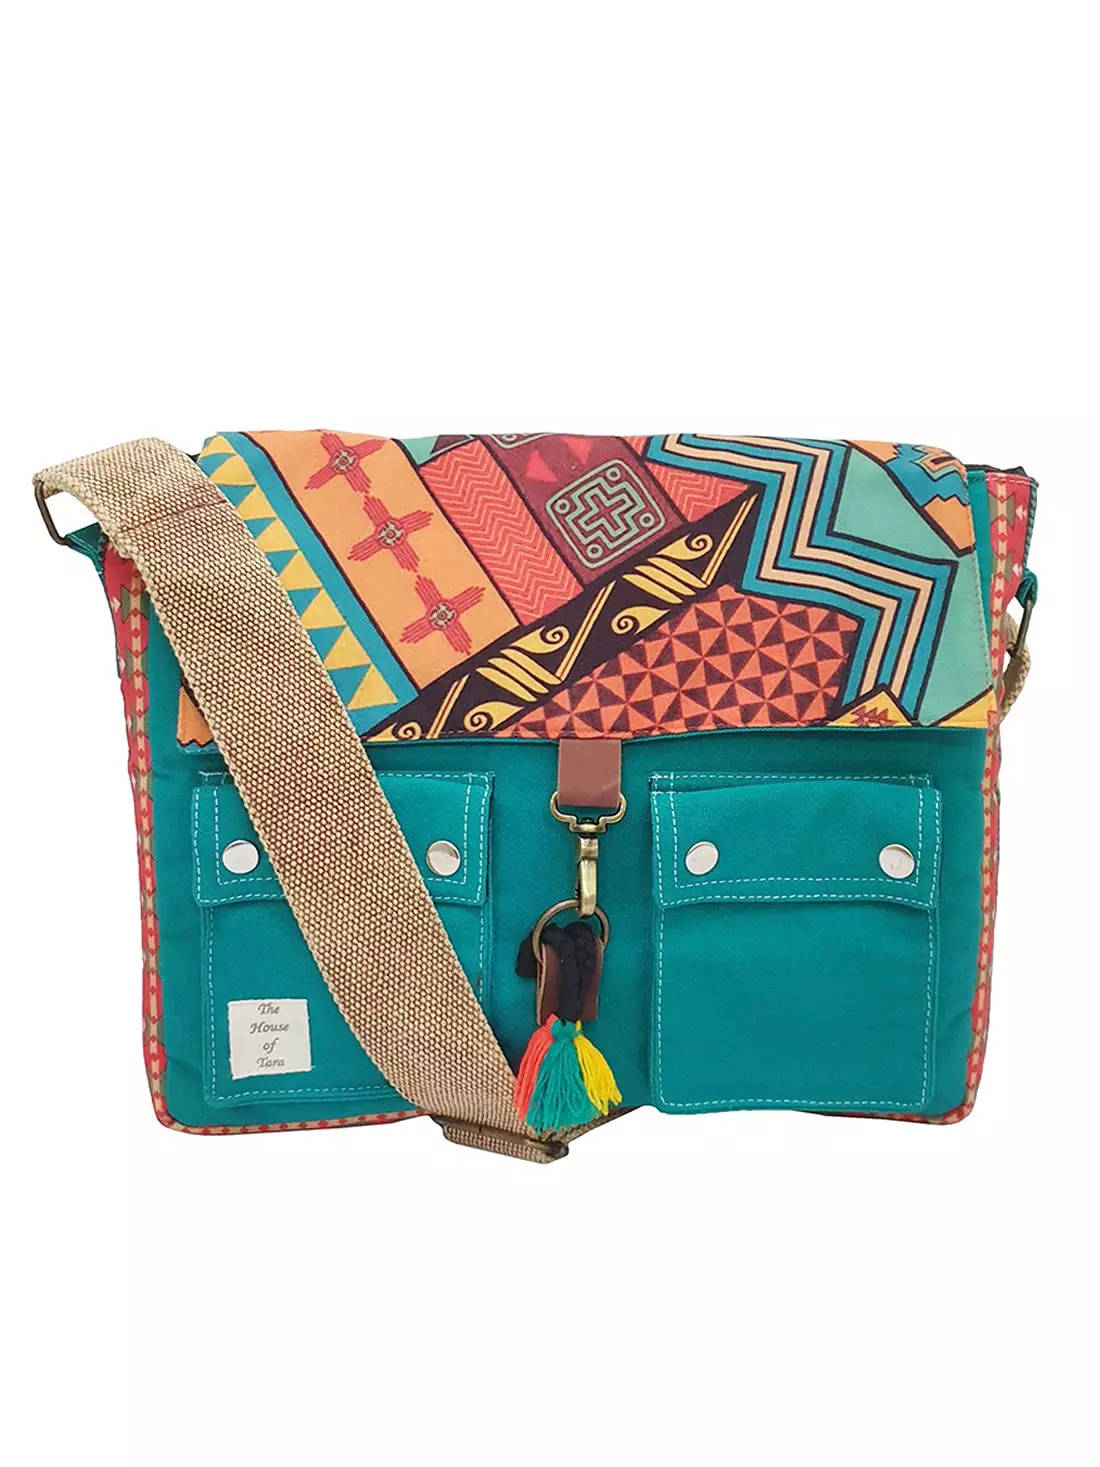 Our pick for the coolest side bags for college going fashionistas